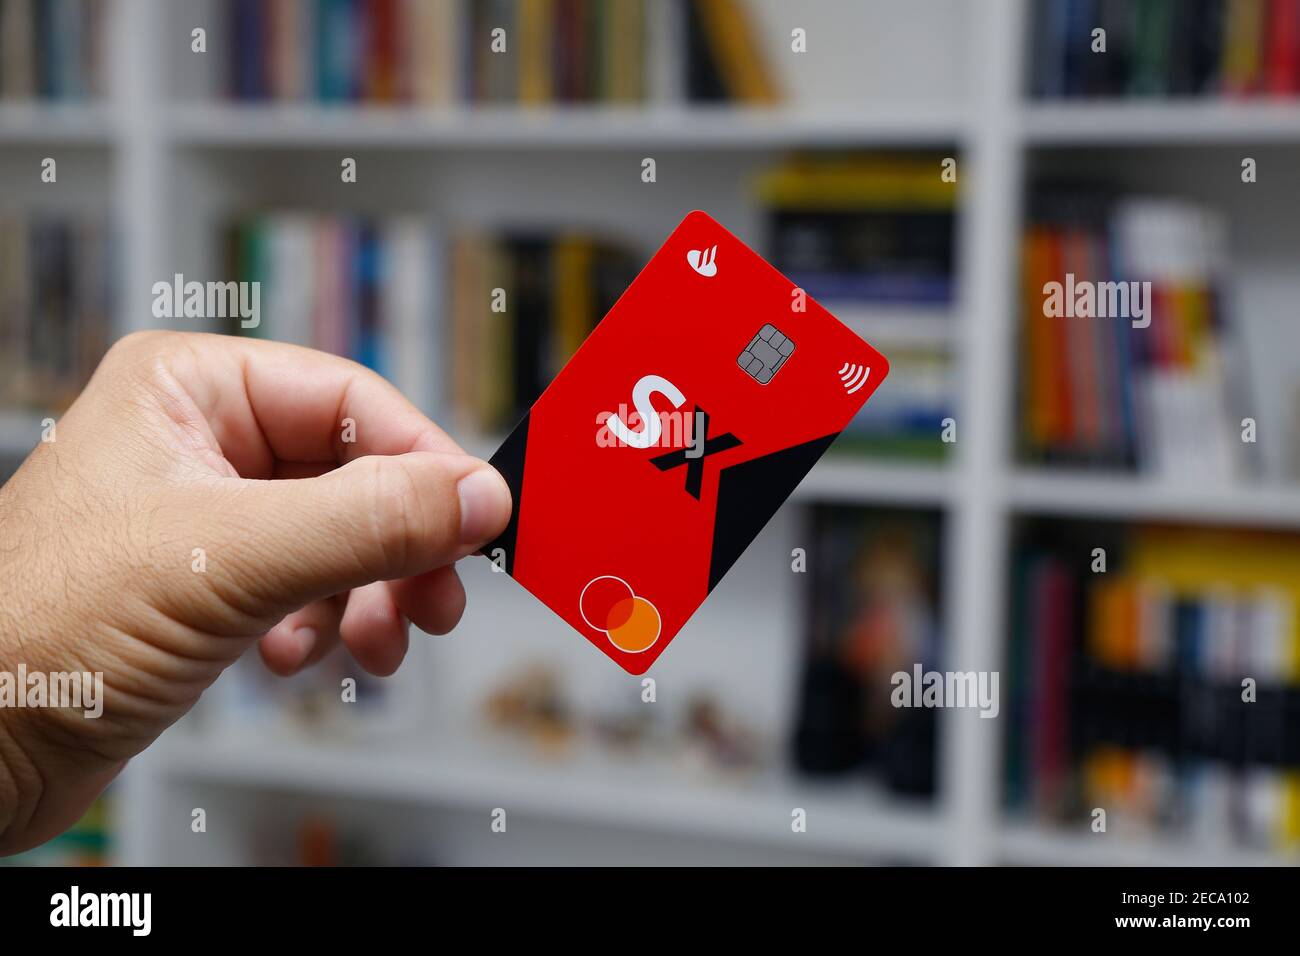 Minas Gerais, Brazil - February 13, 2021: credit card with Santander SX and Mastercard brand. Digital payment system. Stock Photo